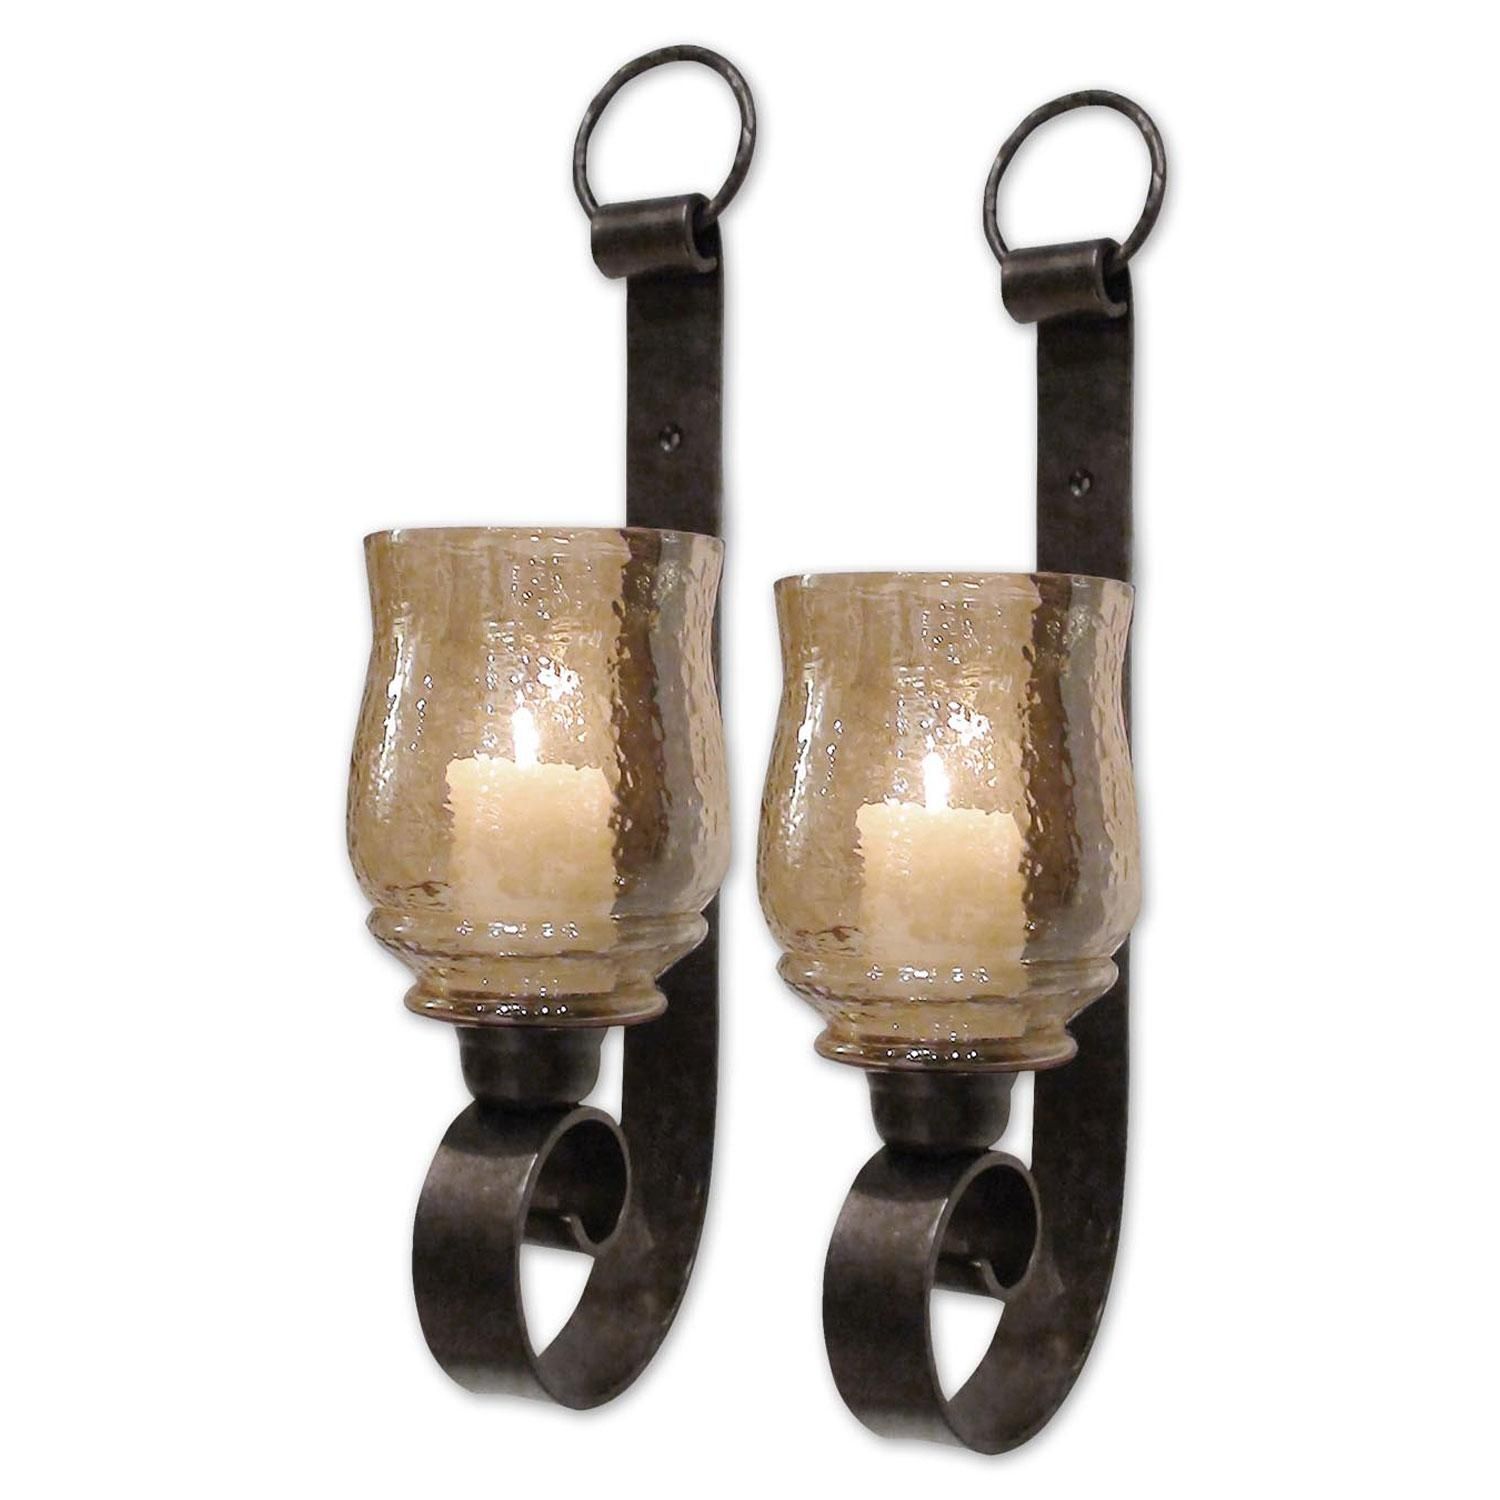 Candle Holders | Metal, Hanging, Decorative, Crystal, Wood, Wall In Metal Wall Art With Candles (View 11 of 20)